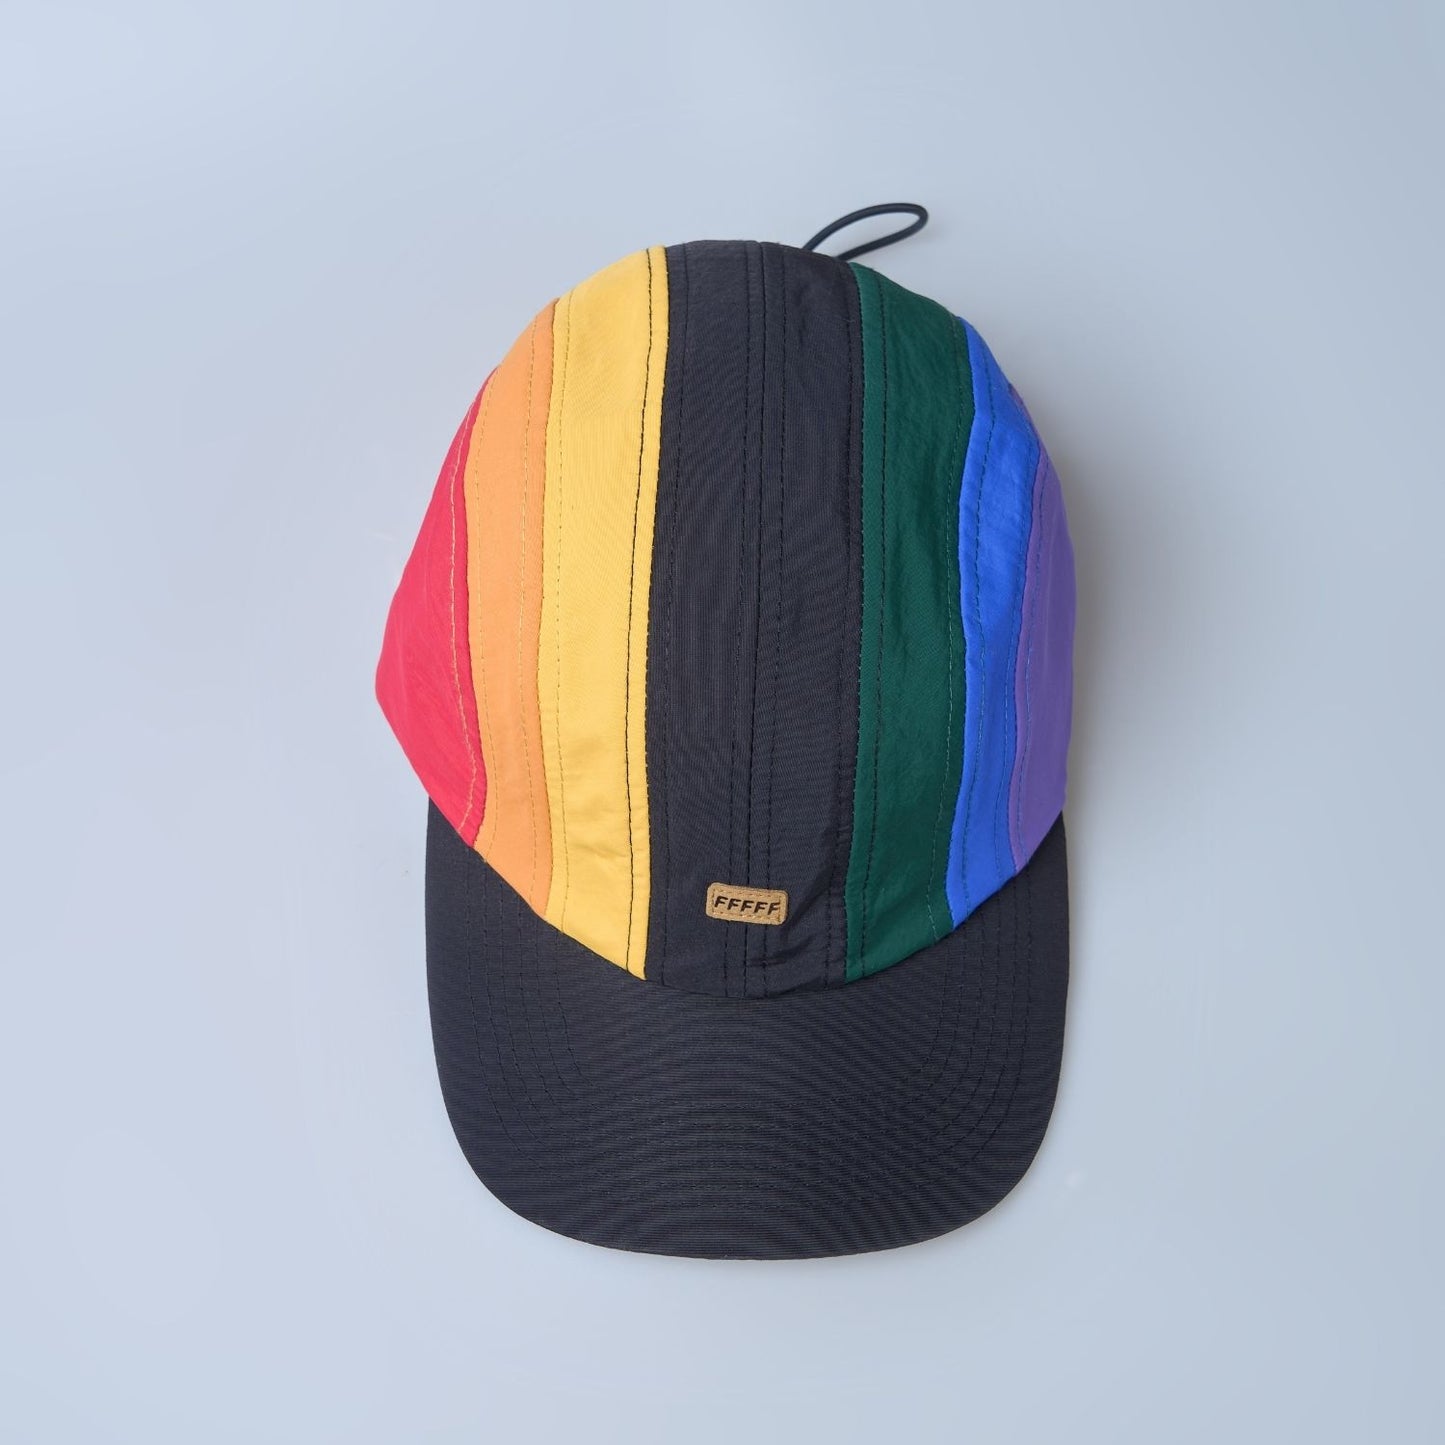 Multi colored, wide brim cap for men with adjustable strap, top view.